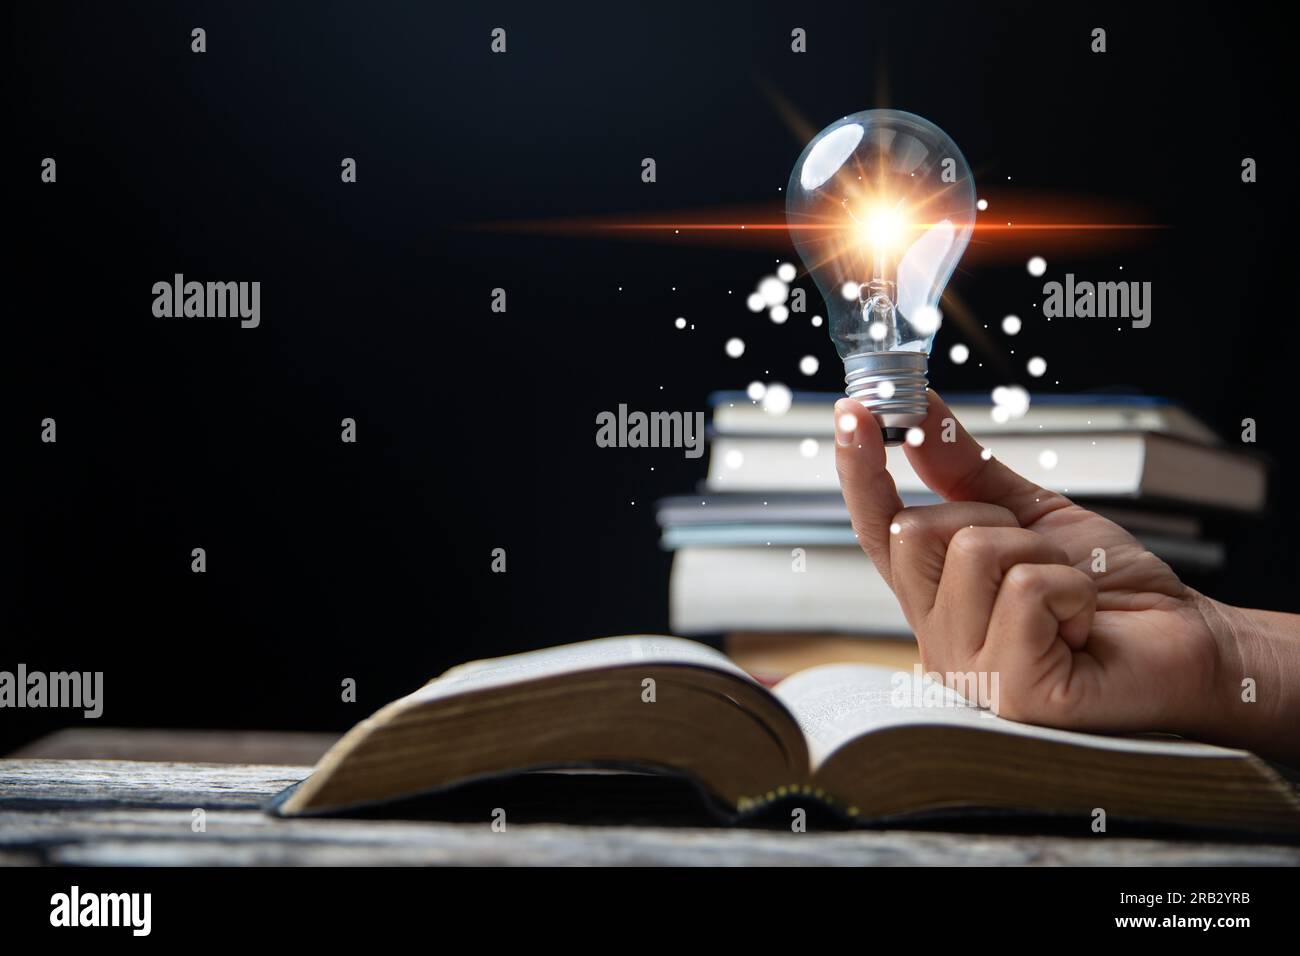 Light bulbs and books. Concept of reading books, knowledge, and searching for new ideas. Innovation and inspiration, Creativity with twinkling lights, Stock Photo